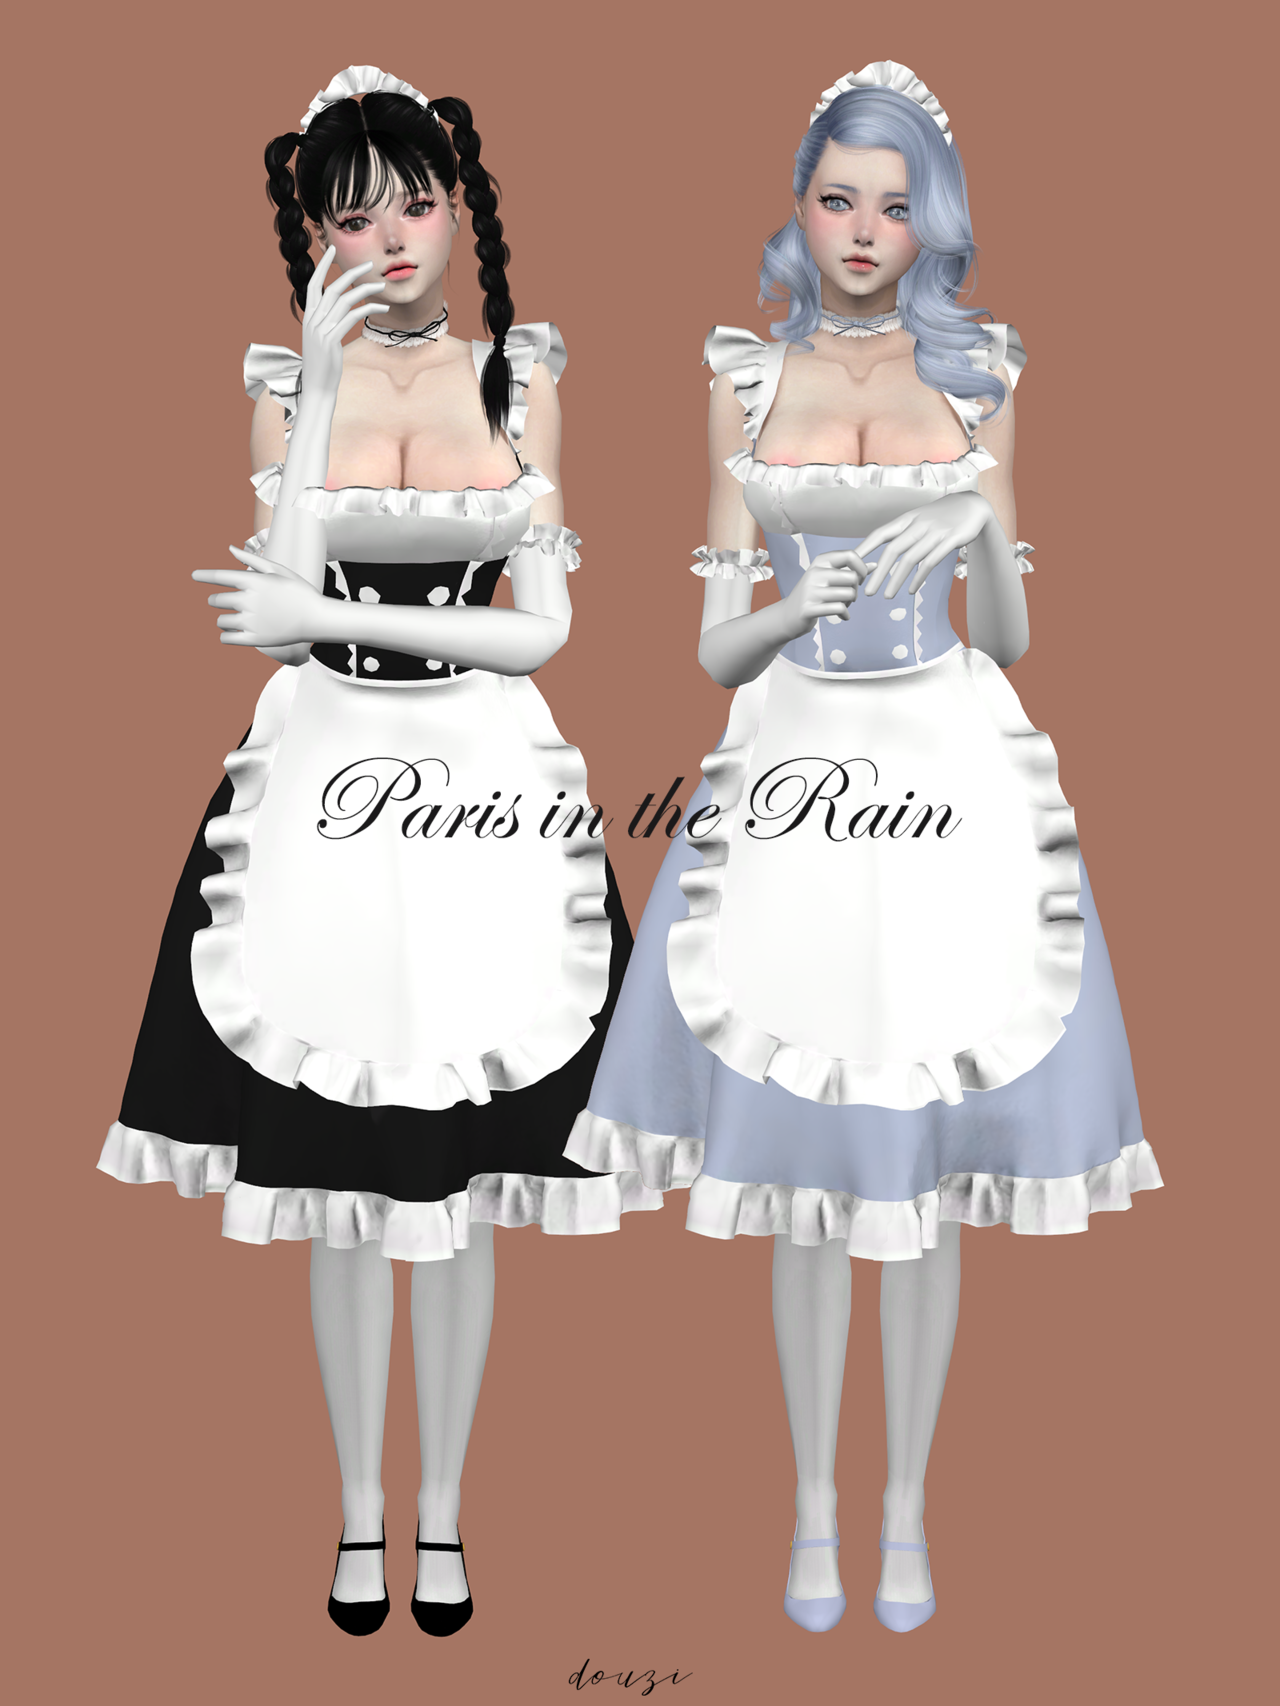 Female Butler Maid Costume Set The Sims 4 Sims4 Clove Share Asia